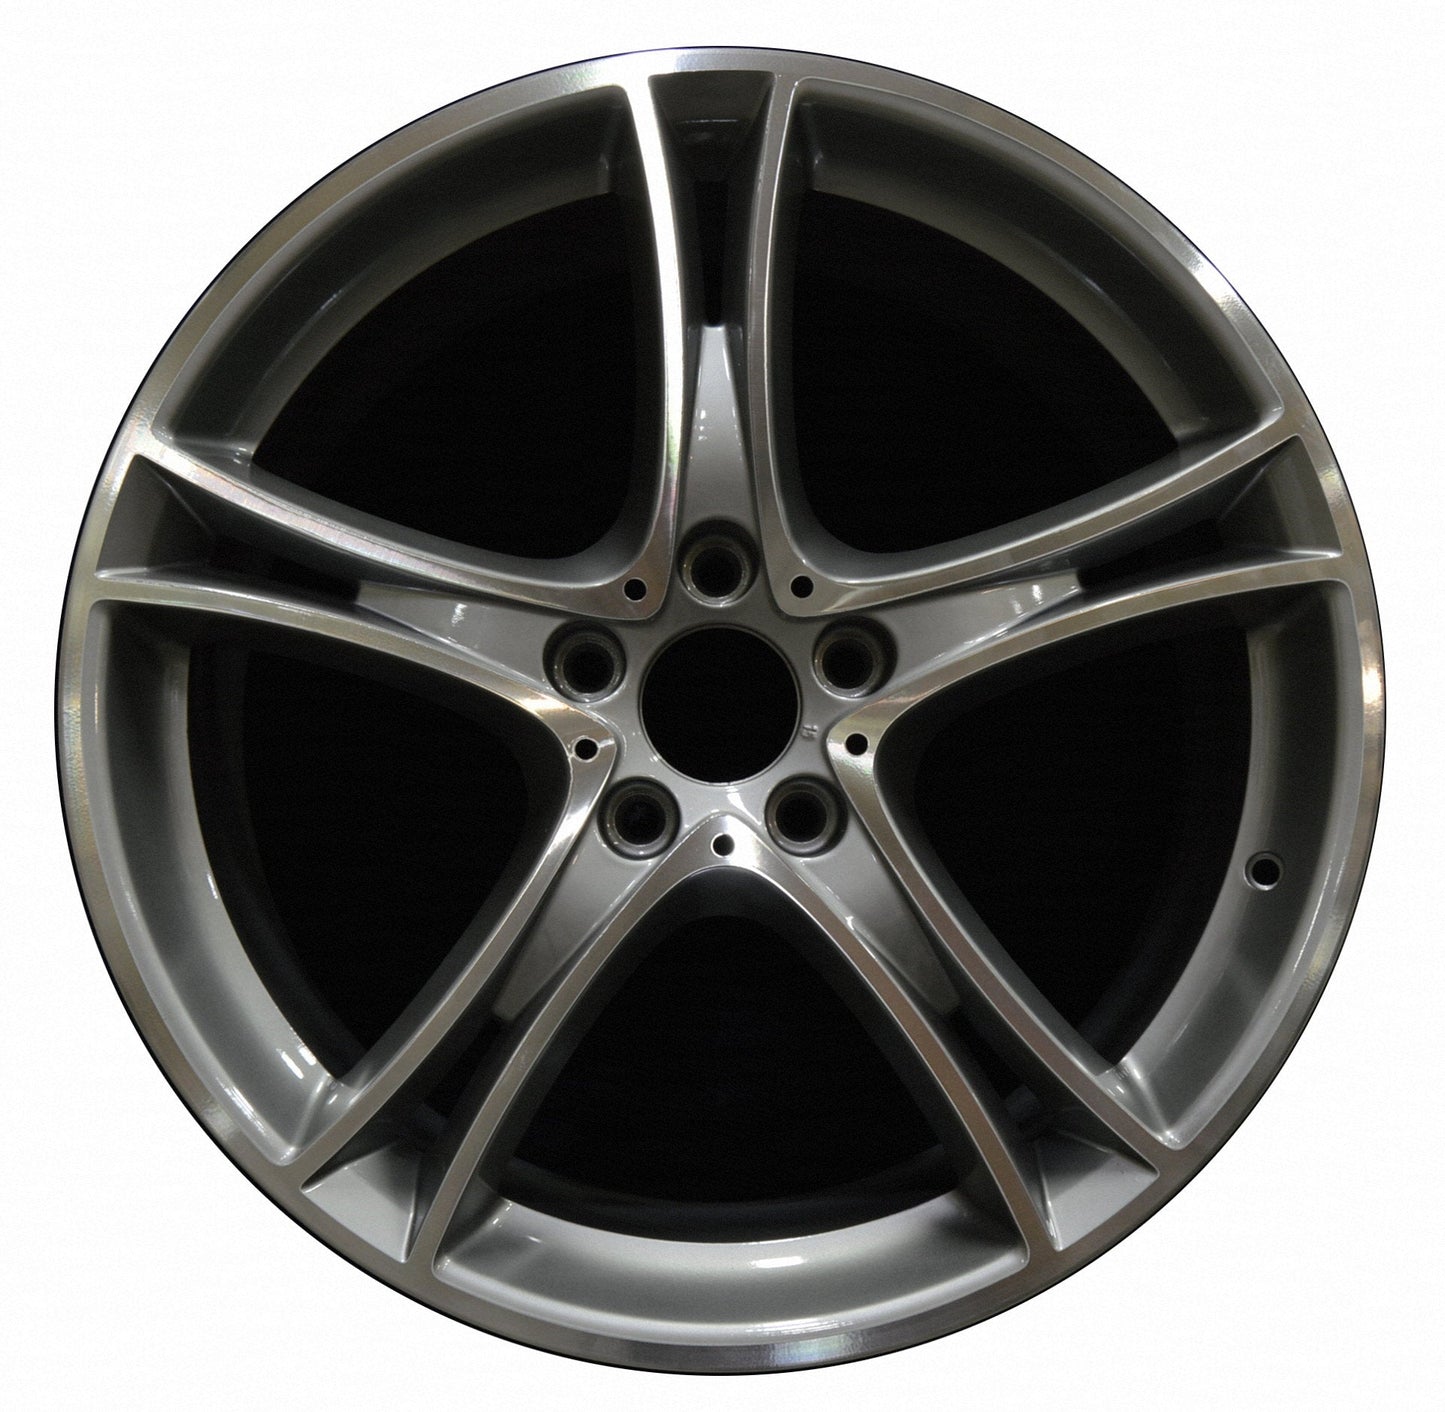 BMW 335i  2012, 2013, 2014 Factory OEM Car Wheel Size 20x8 Alloy WAO.71550FT.LC116.MABRT